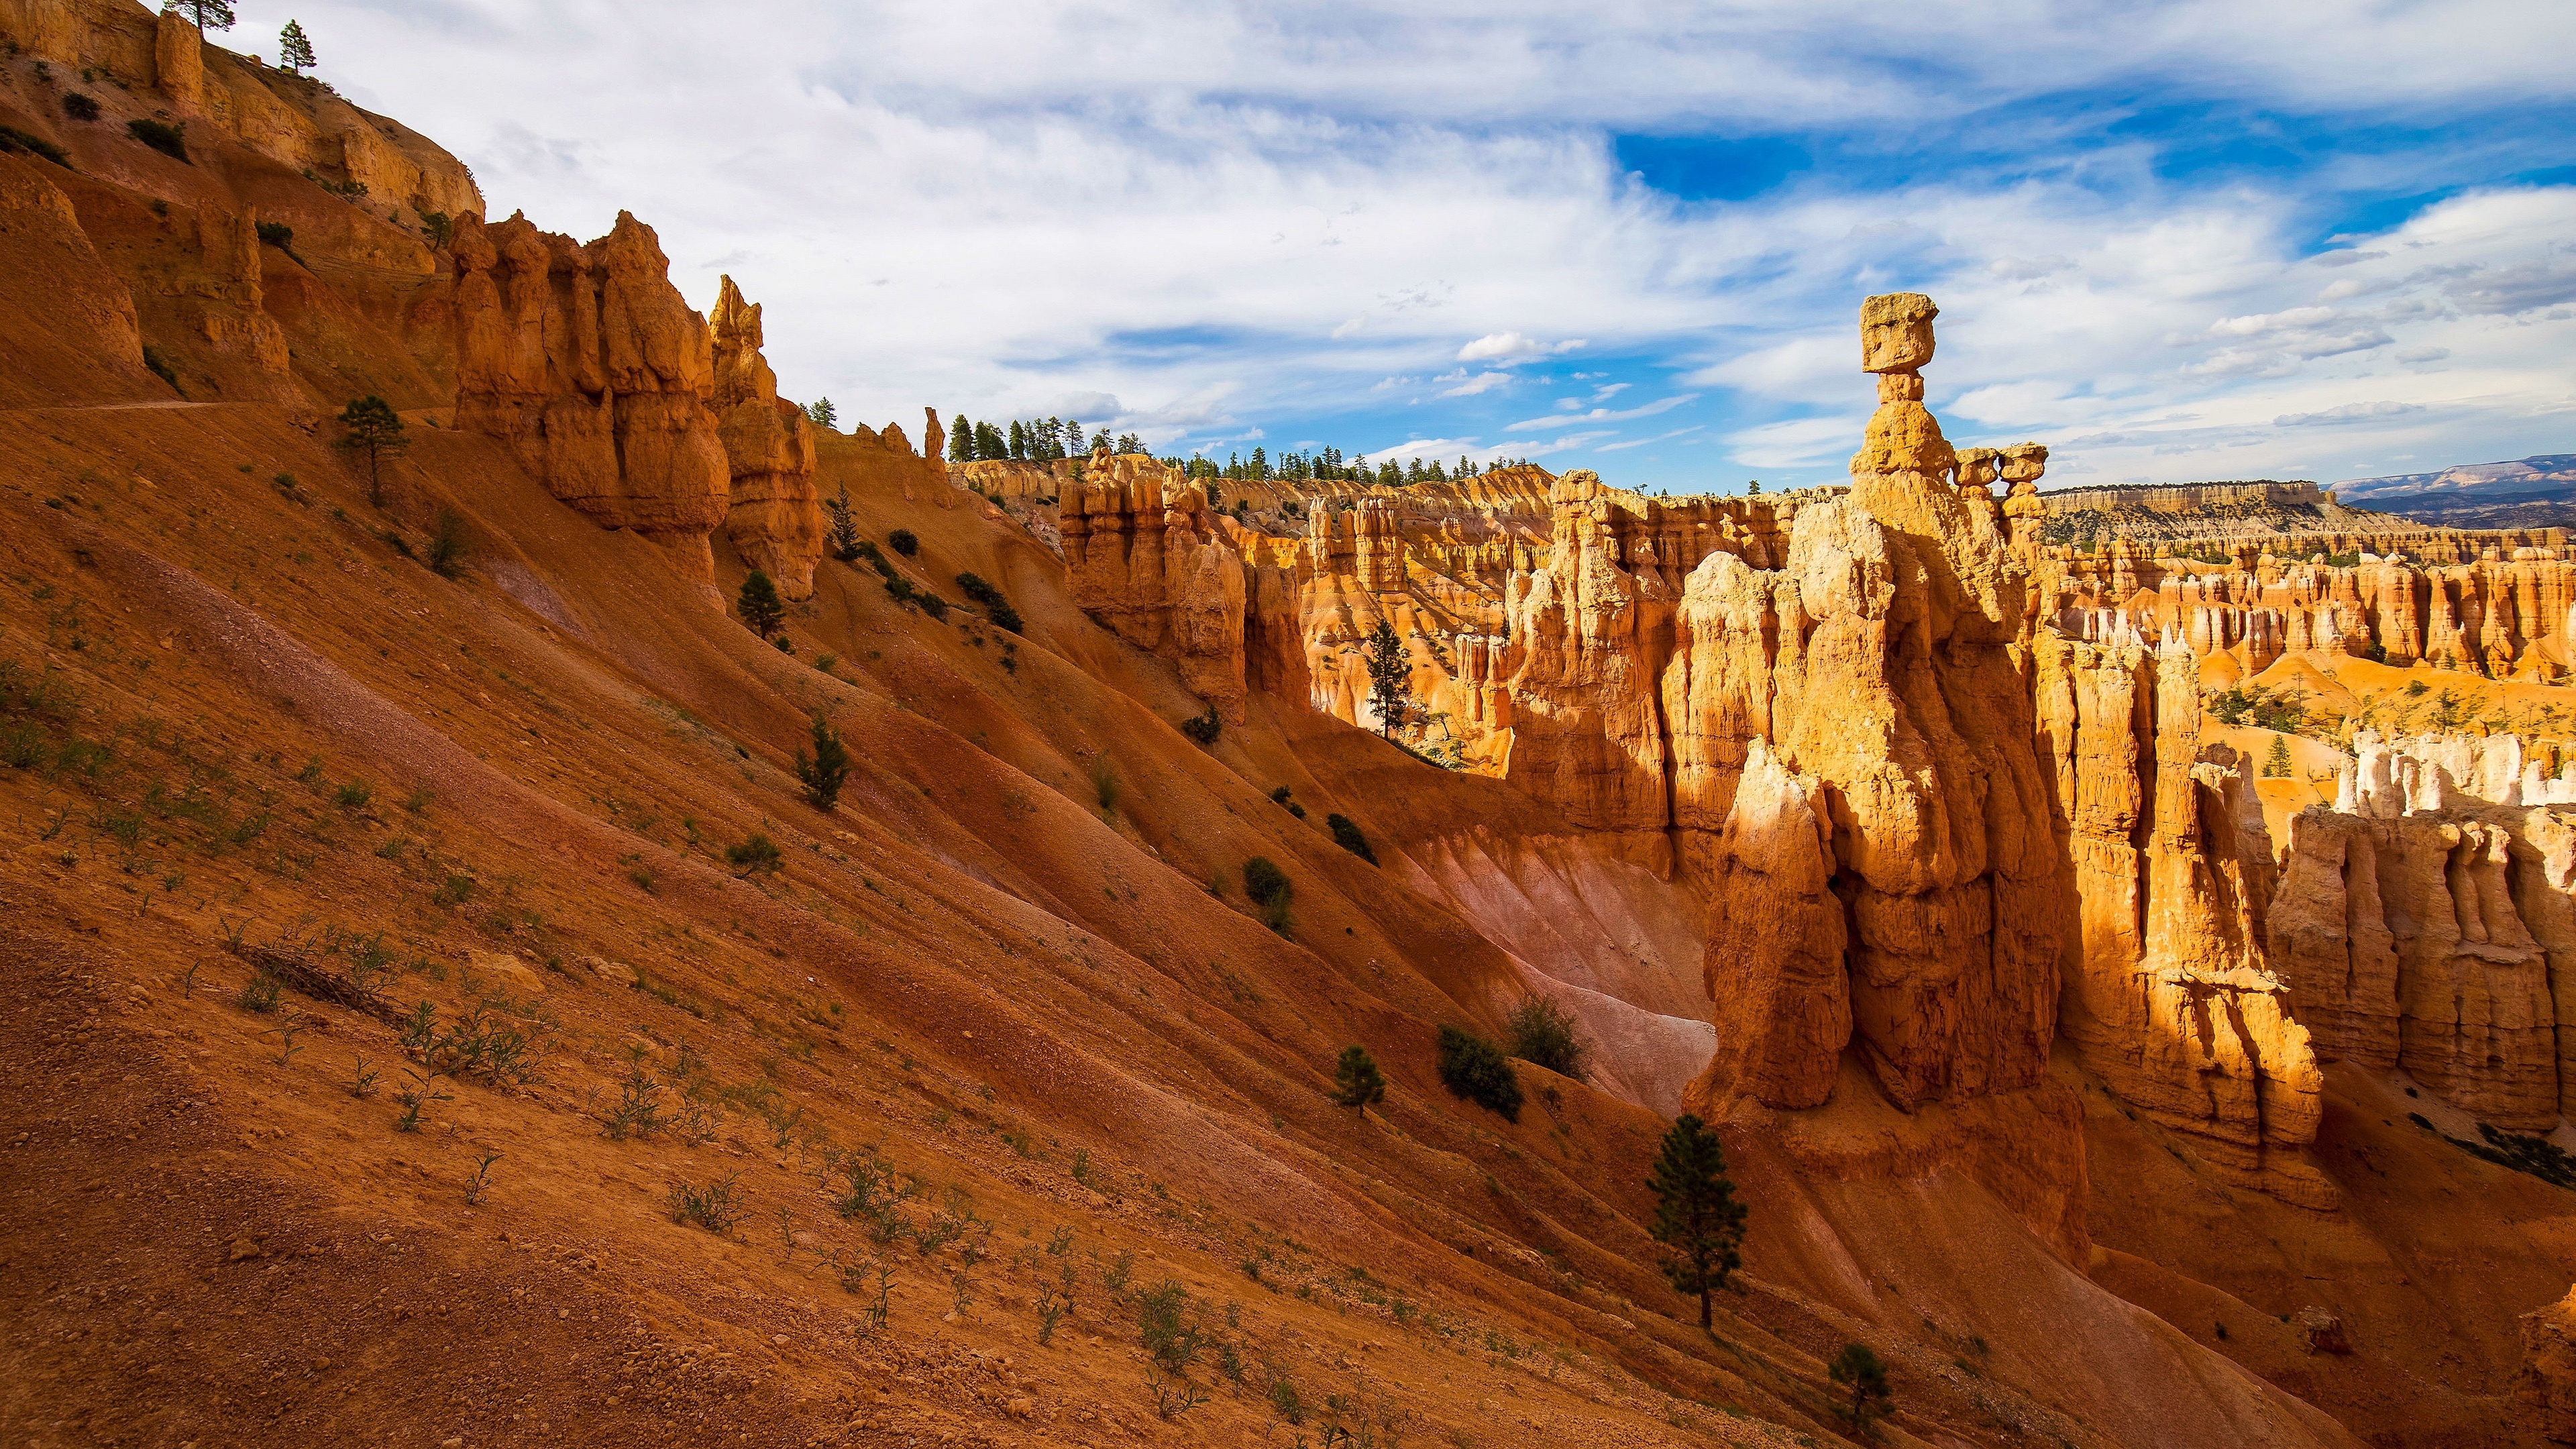 Bryce Canyon National Park, Wallpaper collection, Natural beauty, Scenic landscapes, 3840x2160 4K Desktop